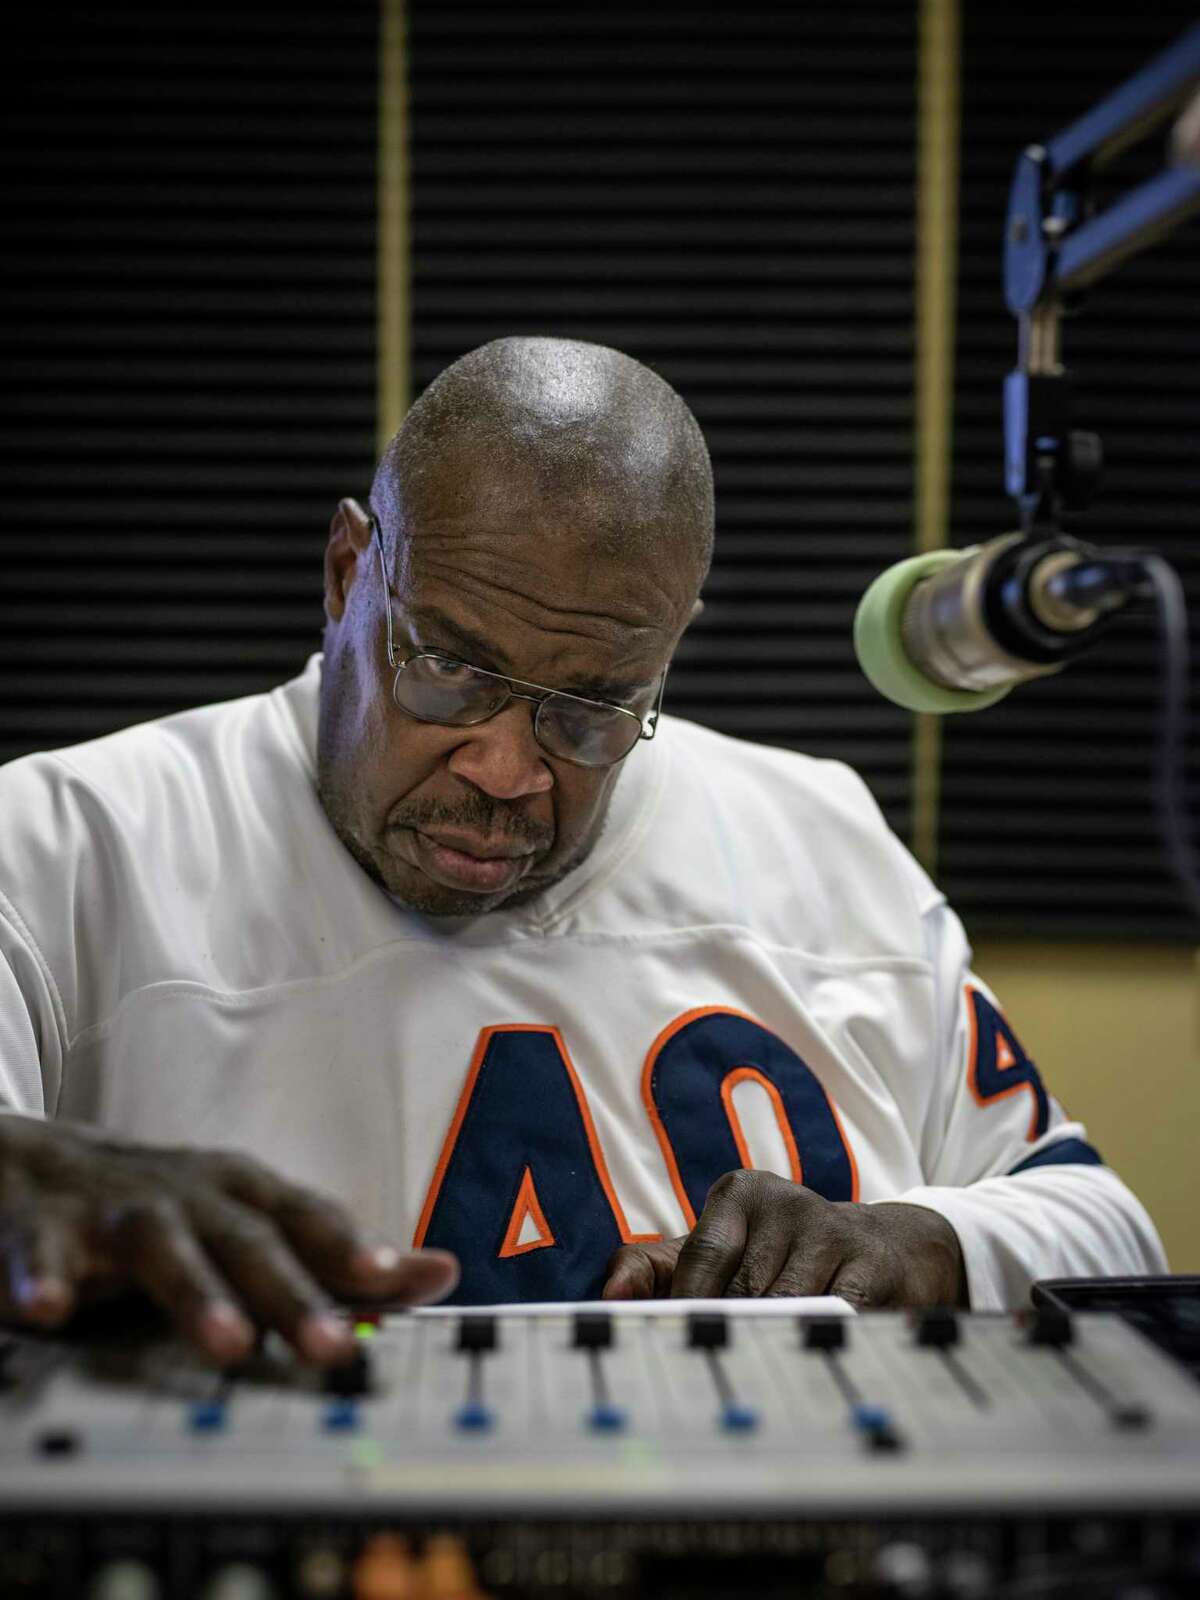 Doug Heath works the board Saturday, Jan. 4, 2020, at KROV-FM, a community broadcast radio station that can be heard on HD radios at 91.7 FM-HD2 and online. On air, Heath is known as “Dr. Doug,” spinning soothing music and giving his message about the power of positive thinking. Many of his listeners don’t know about the near-fatal accident he had that fuels his positive outlook.